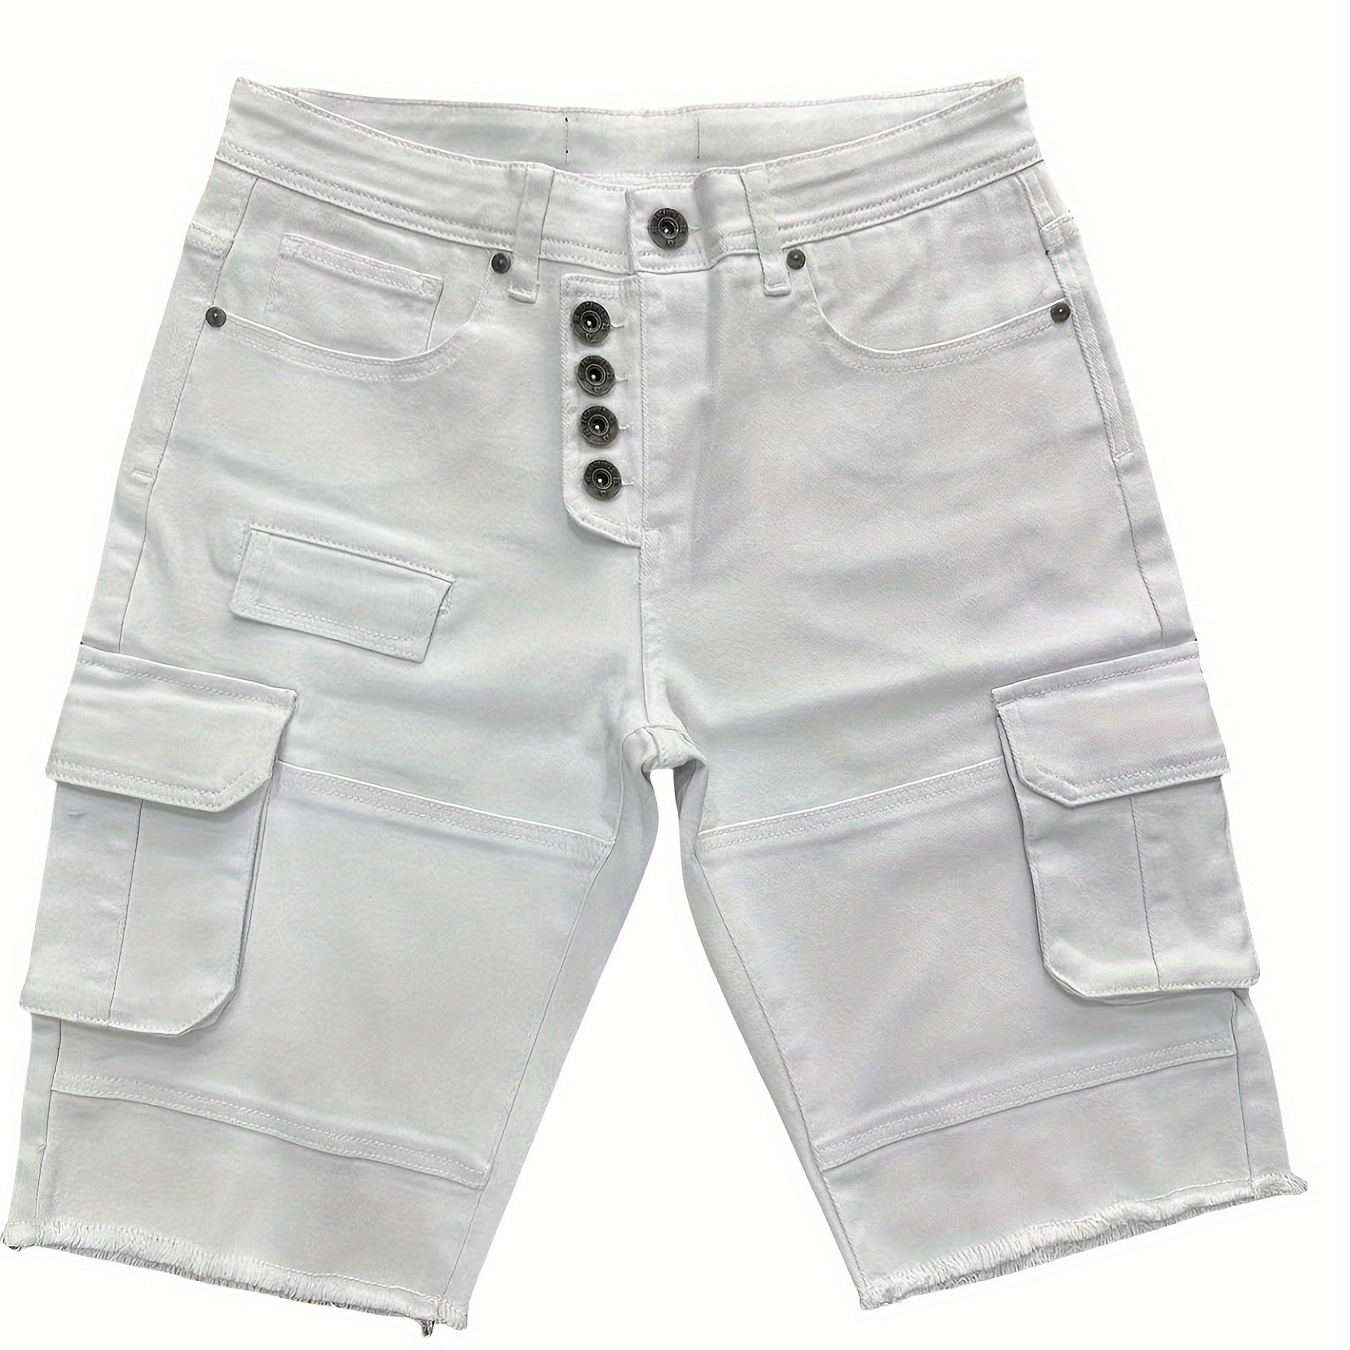 

Men's Casual White Cargo Shorts With Multi-pocket Design And Button Closure, Frayed Hem Detail, Outdoor Summer Wear - Style E911402-te-e7